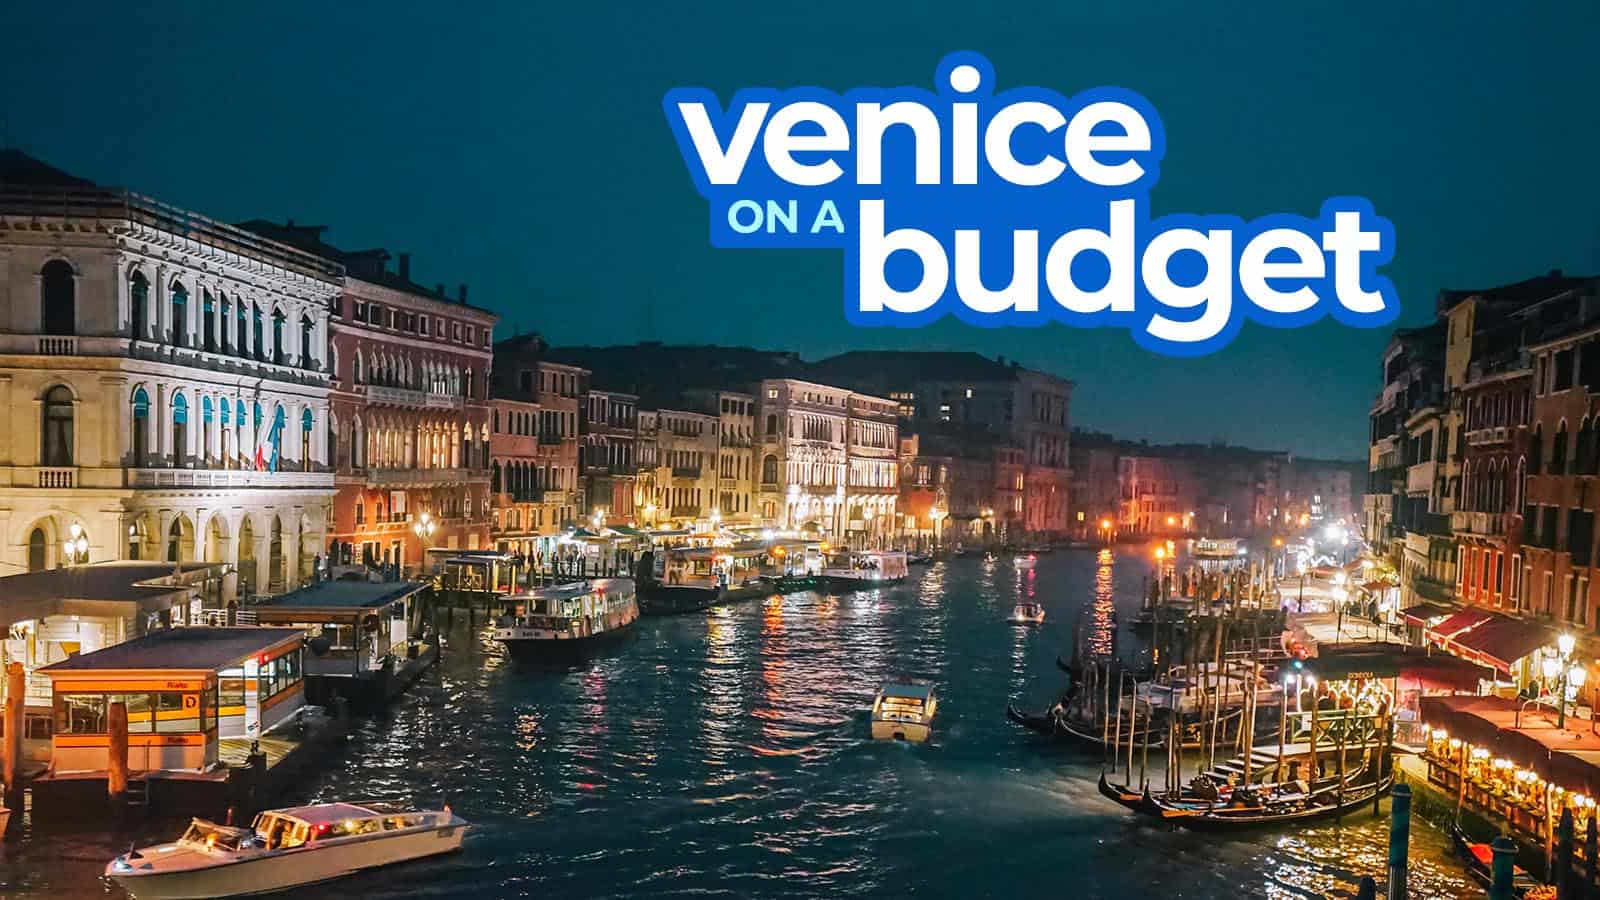 VENICE TRAVEL GUIDE: Itinerary, Budget, Things to Do